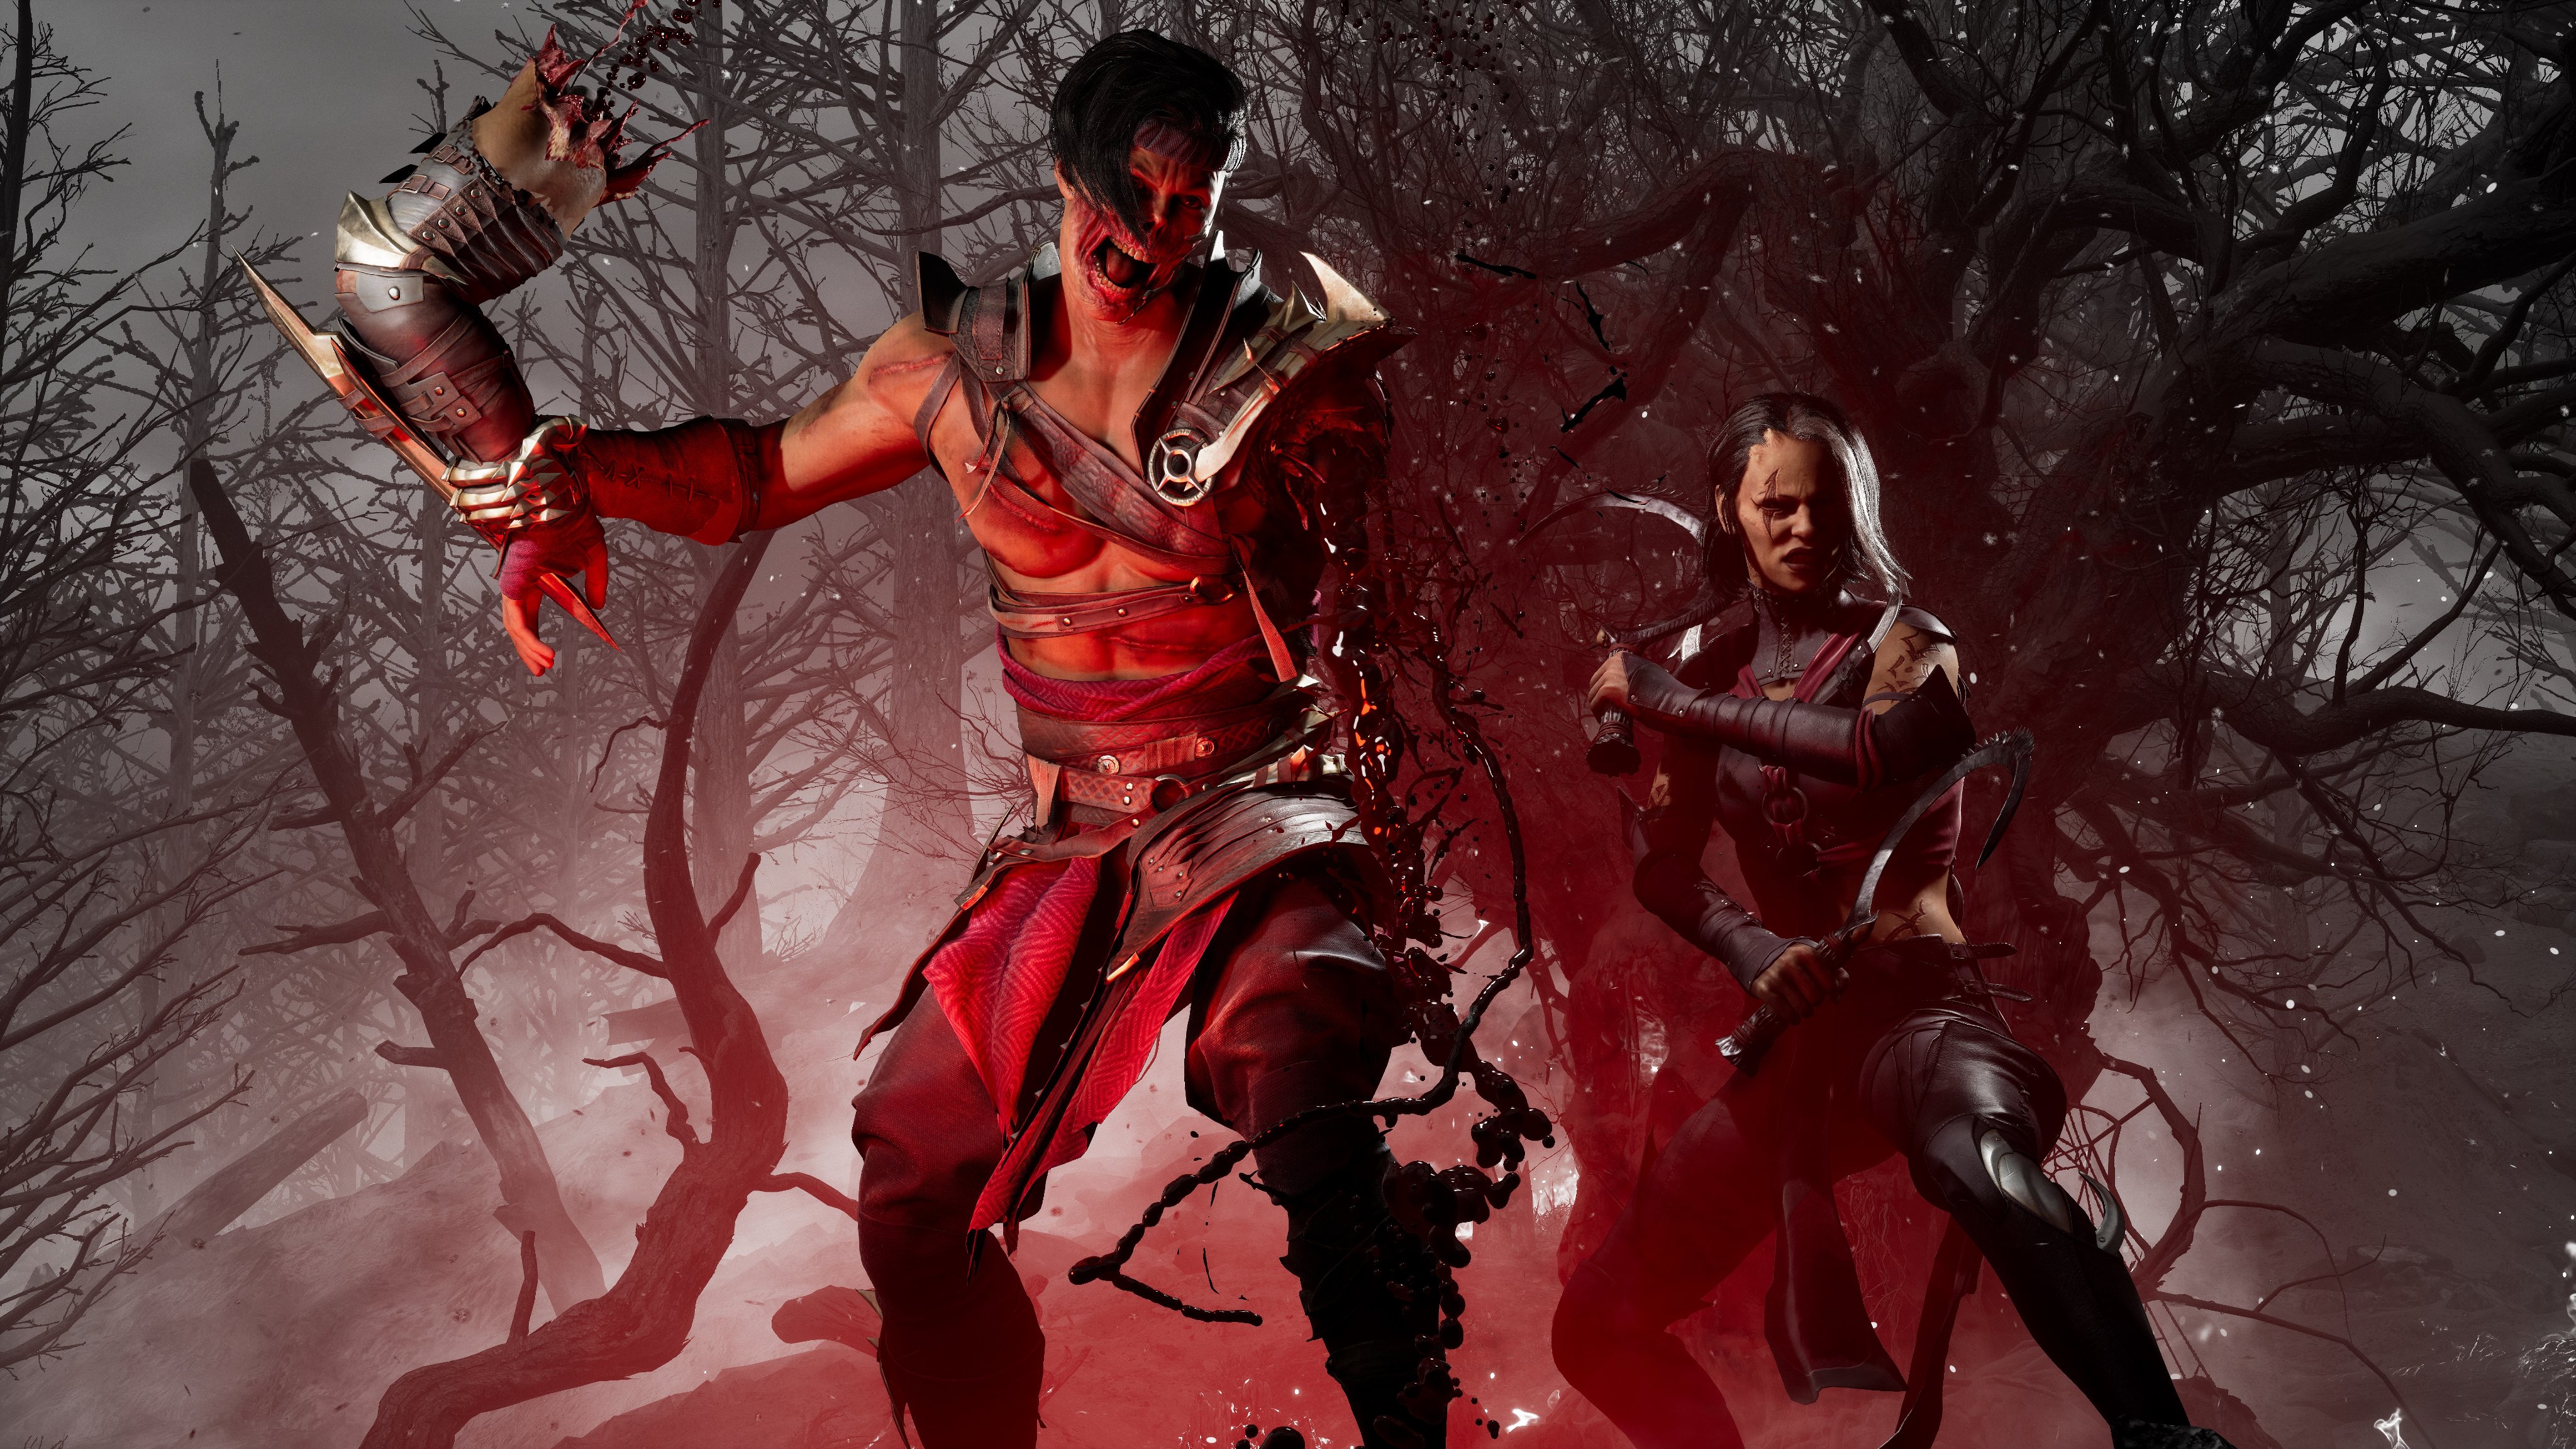 Mortal Kombat X Game Options are Red When I Start the Game. – Mortal Kombat  Games